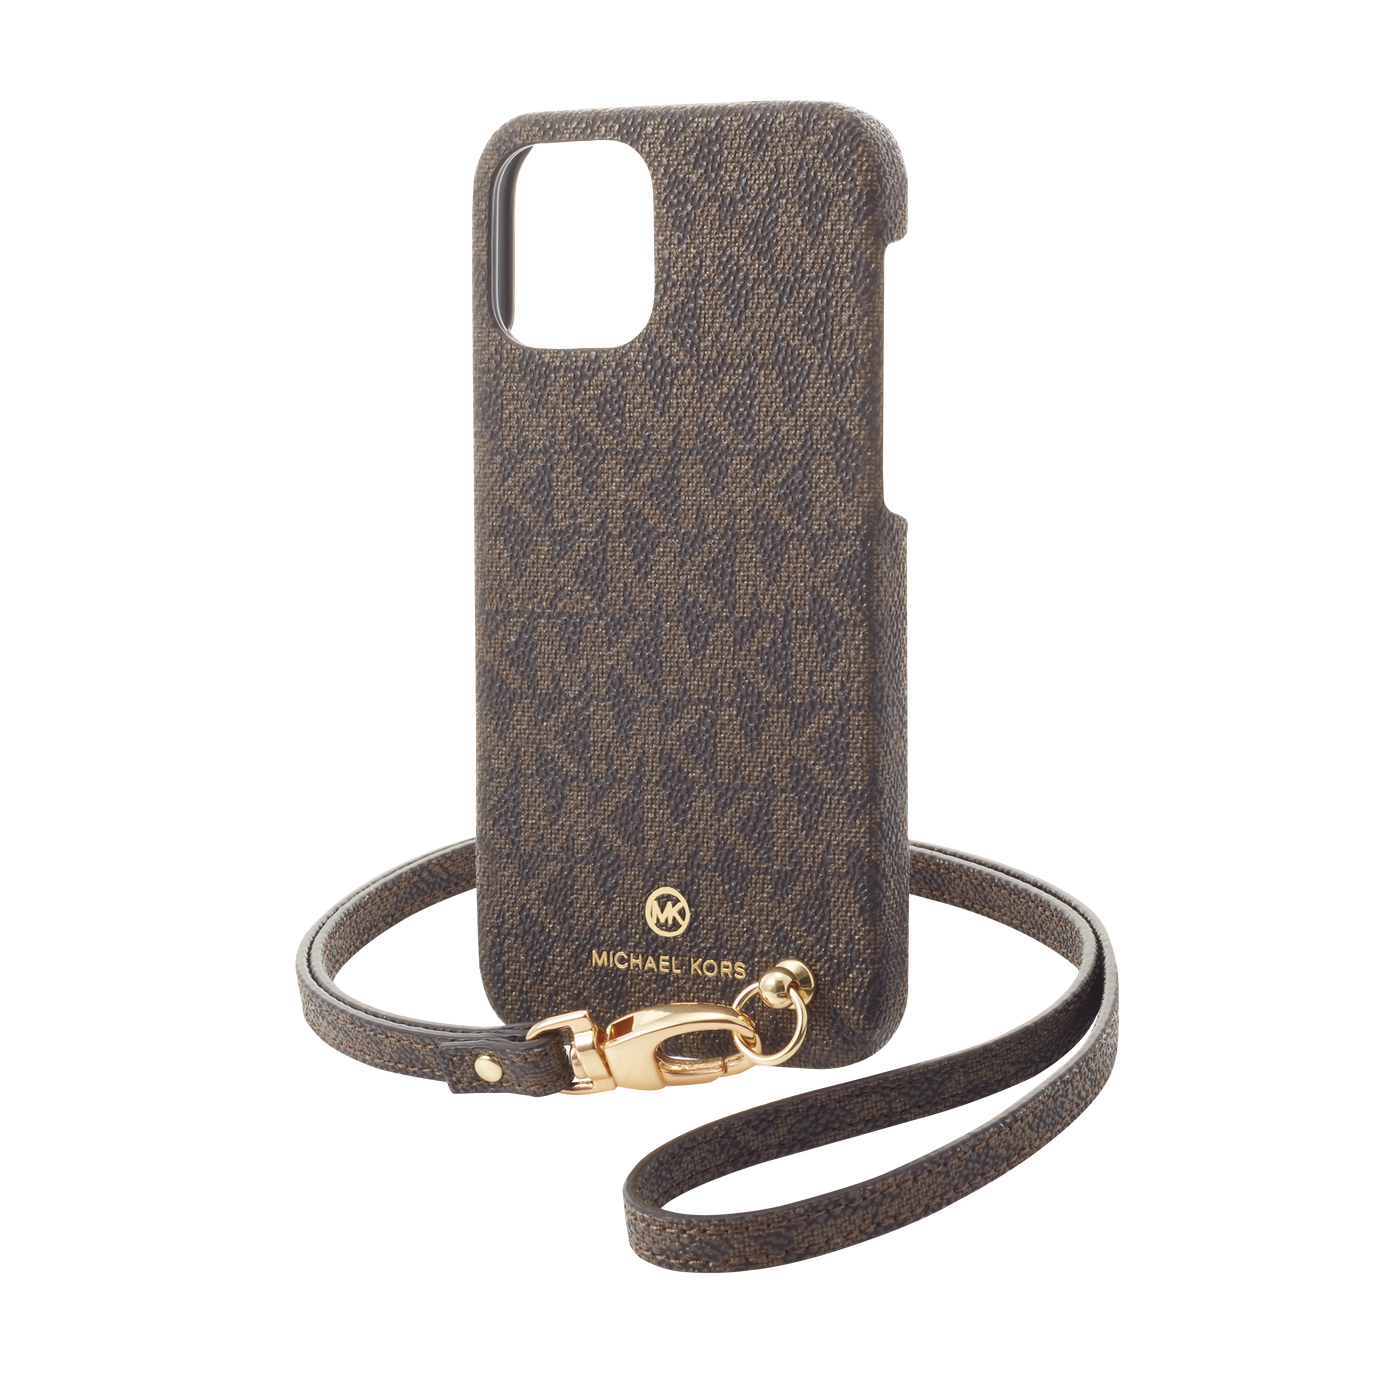 MICHAEL KORS - Slim Wrap Case Signature with Neck Strap - Magsafe for iPhone 12 mini - Brown